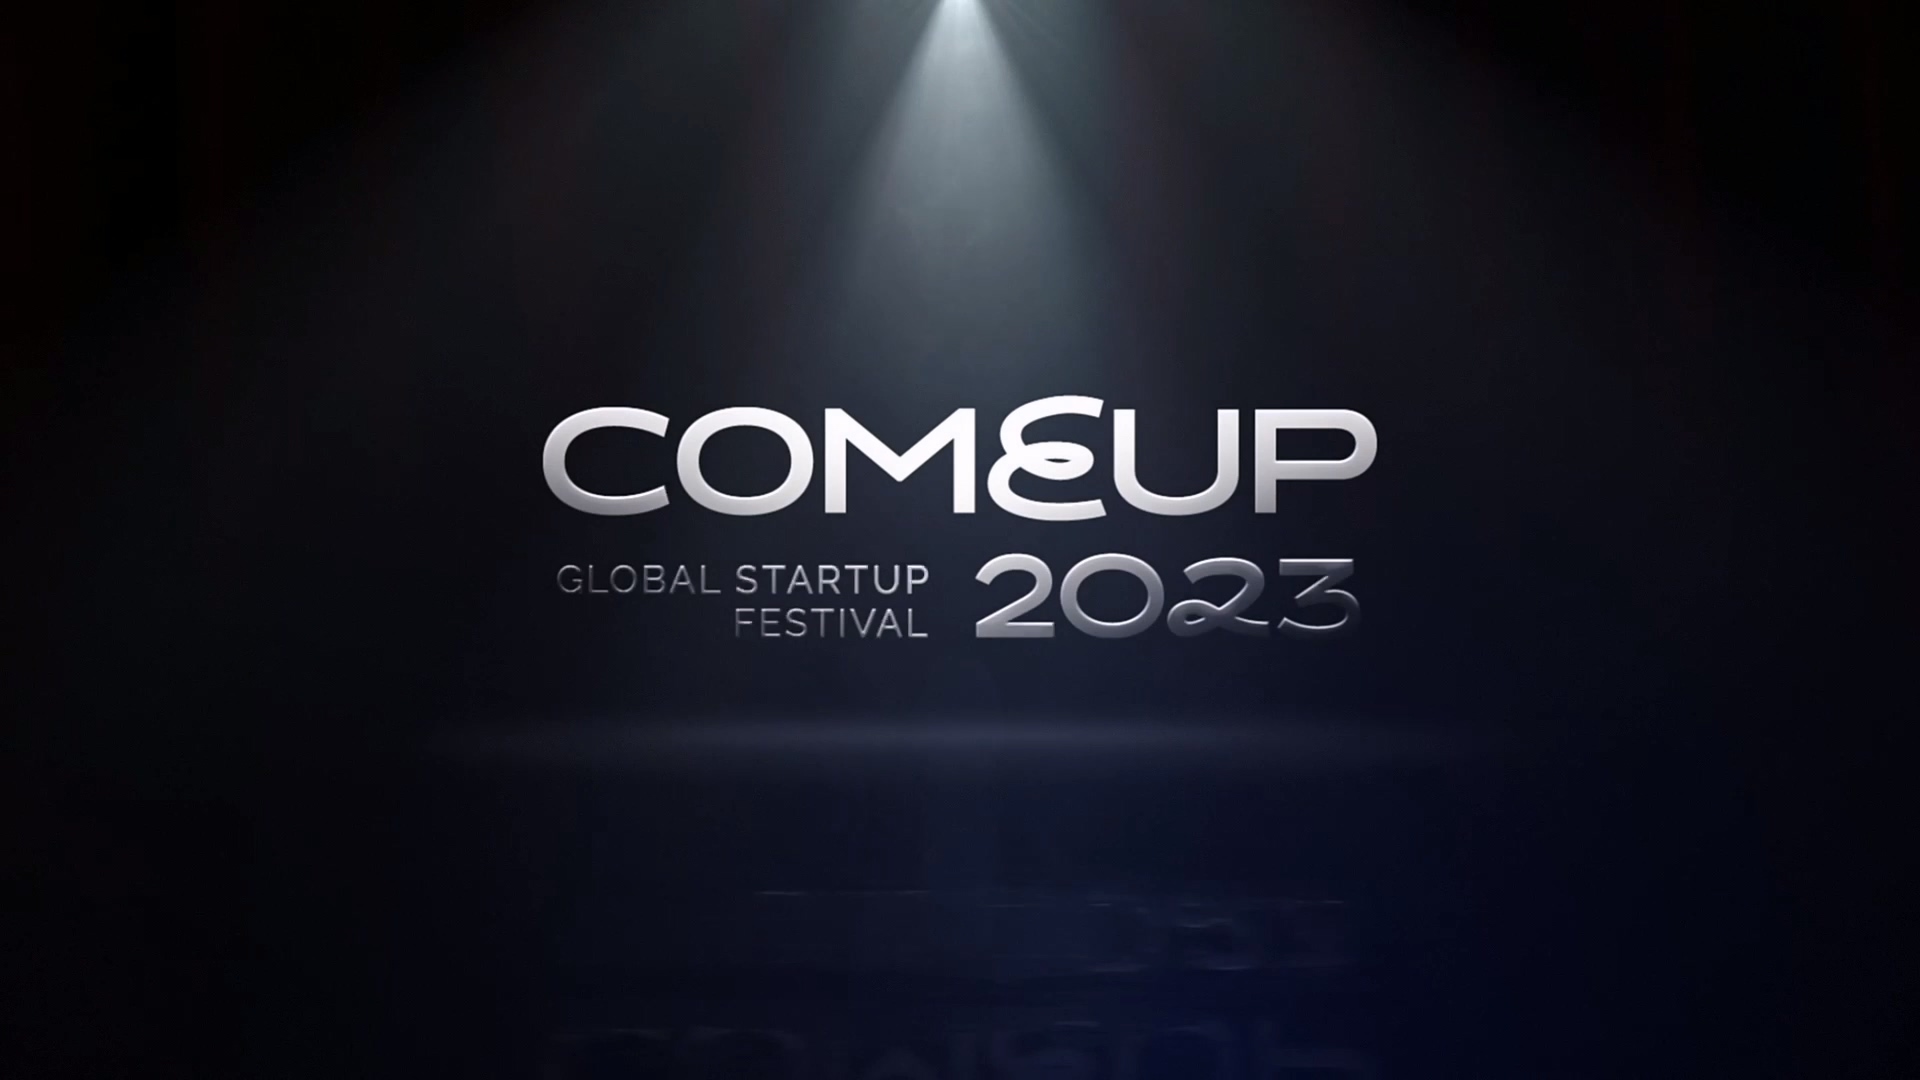 COMEUP2023 Global startup Festival